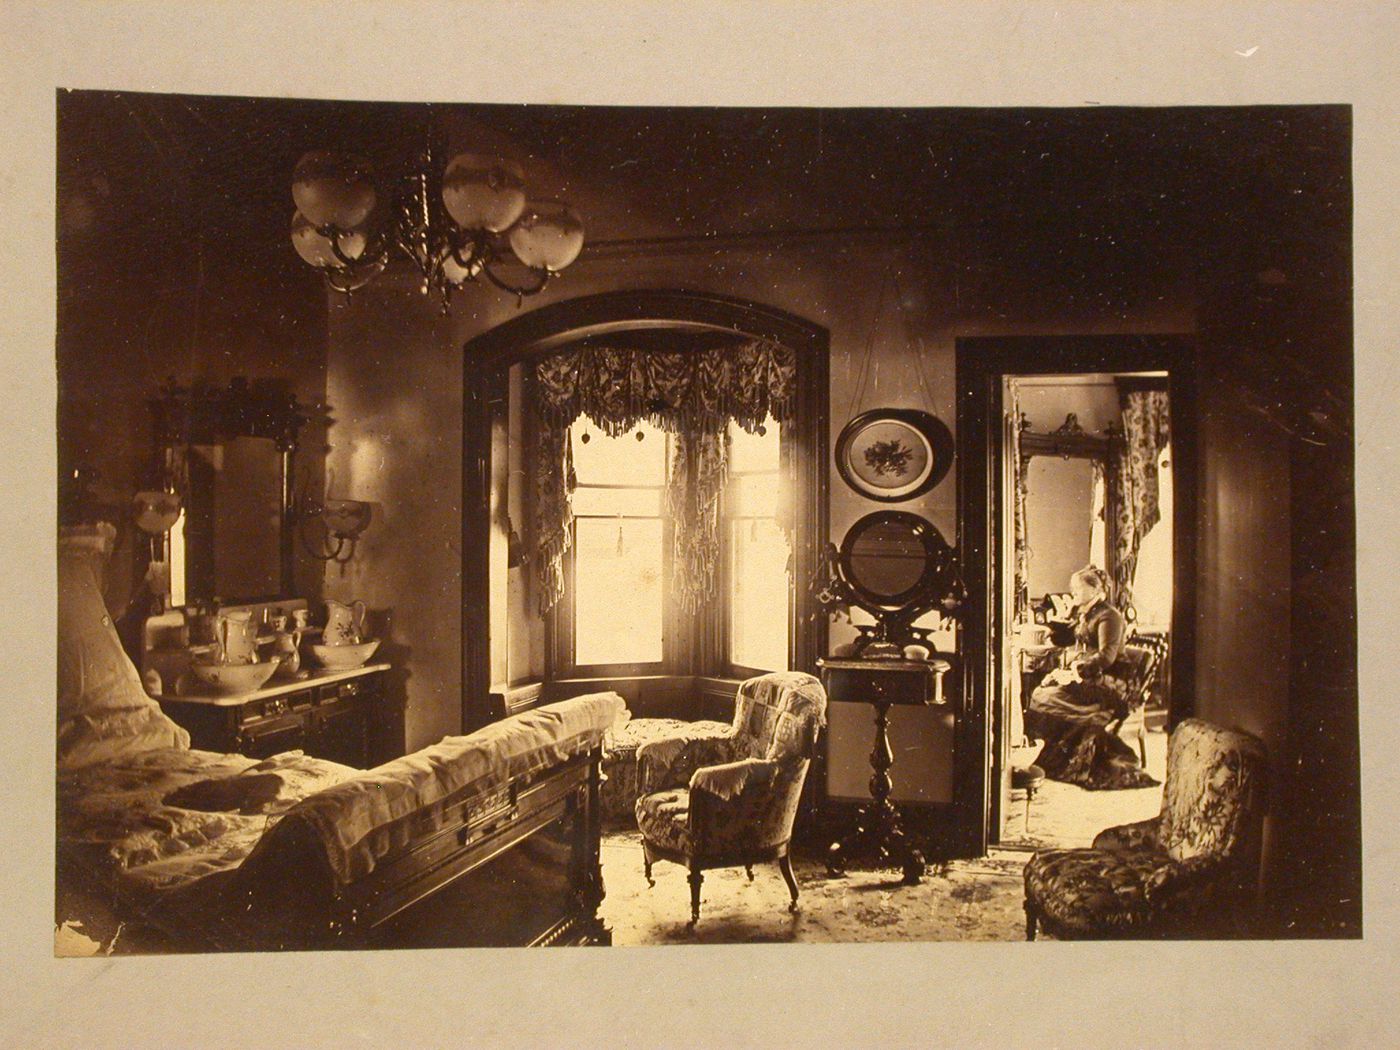 Rozenhof, Residence of S. R. Van Duzer, interior view of bedroom, showing woman seated in another room, Newburgh, New York